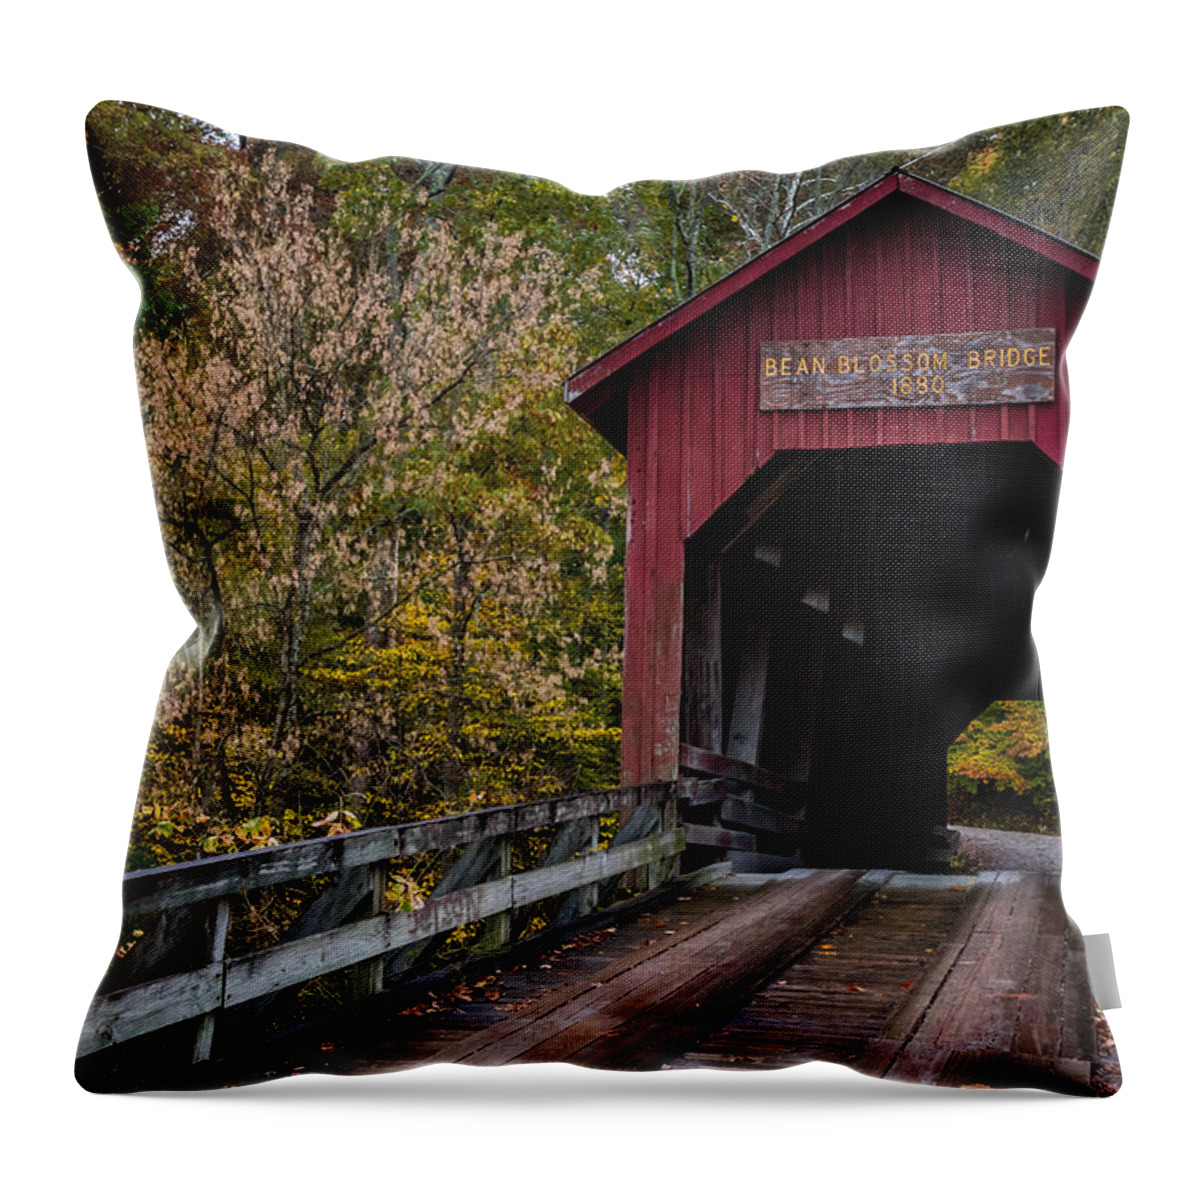 Autumn Throw Pillow featuring the photograph The Bean Blossom Bridge by Ron Pate